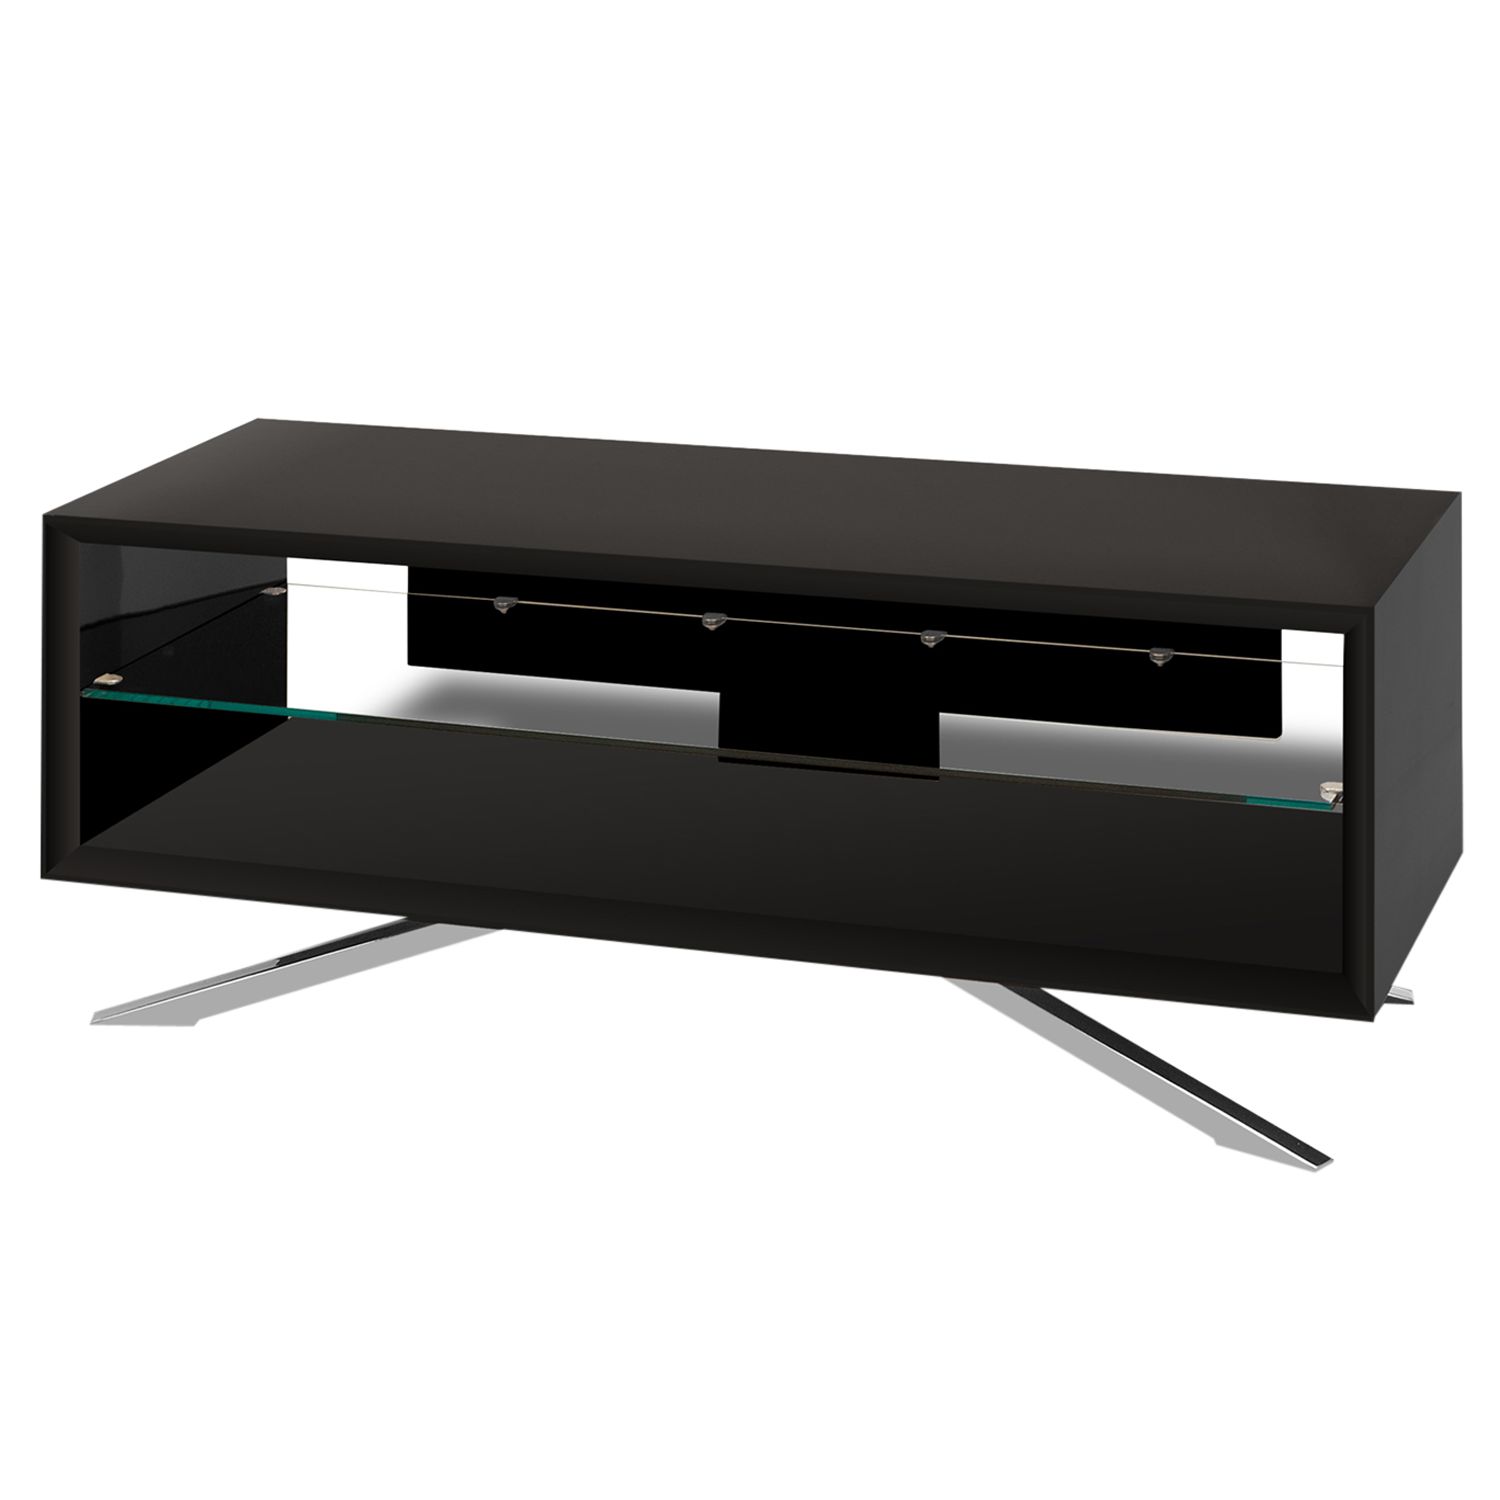 Arena AA110B TV stand for up to 50-inch